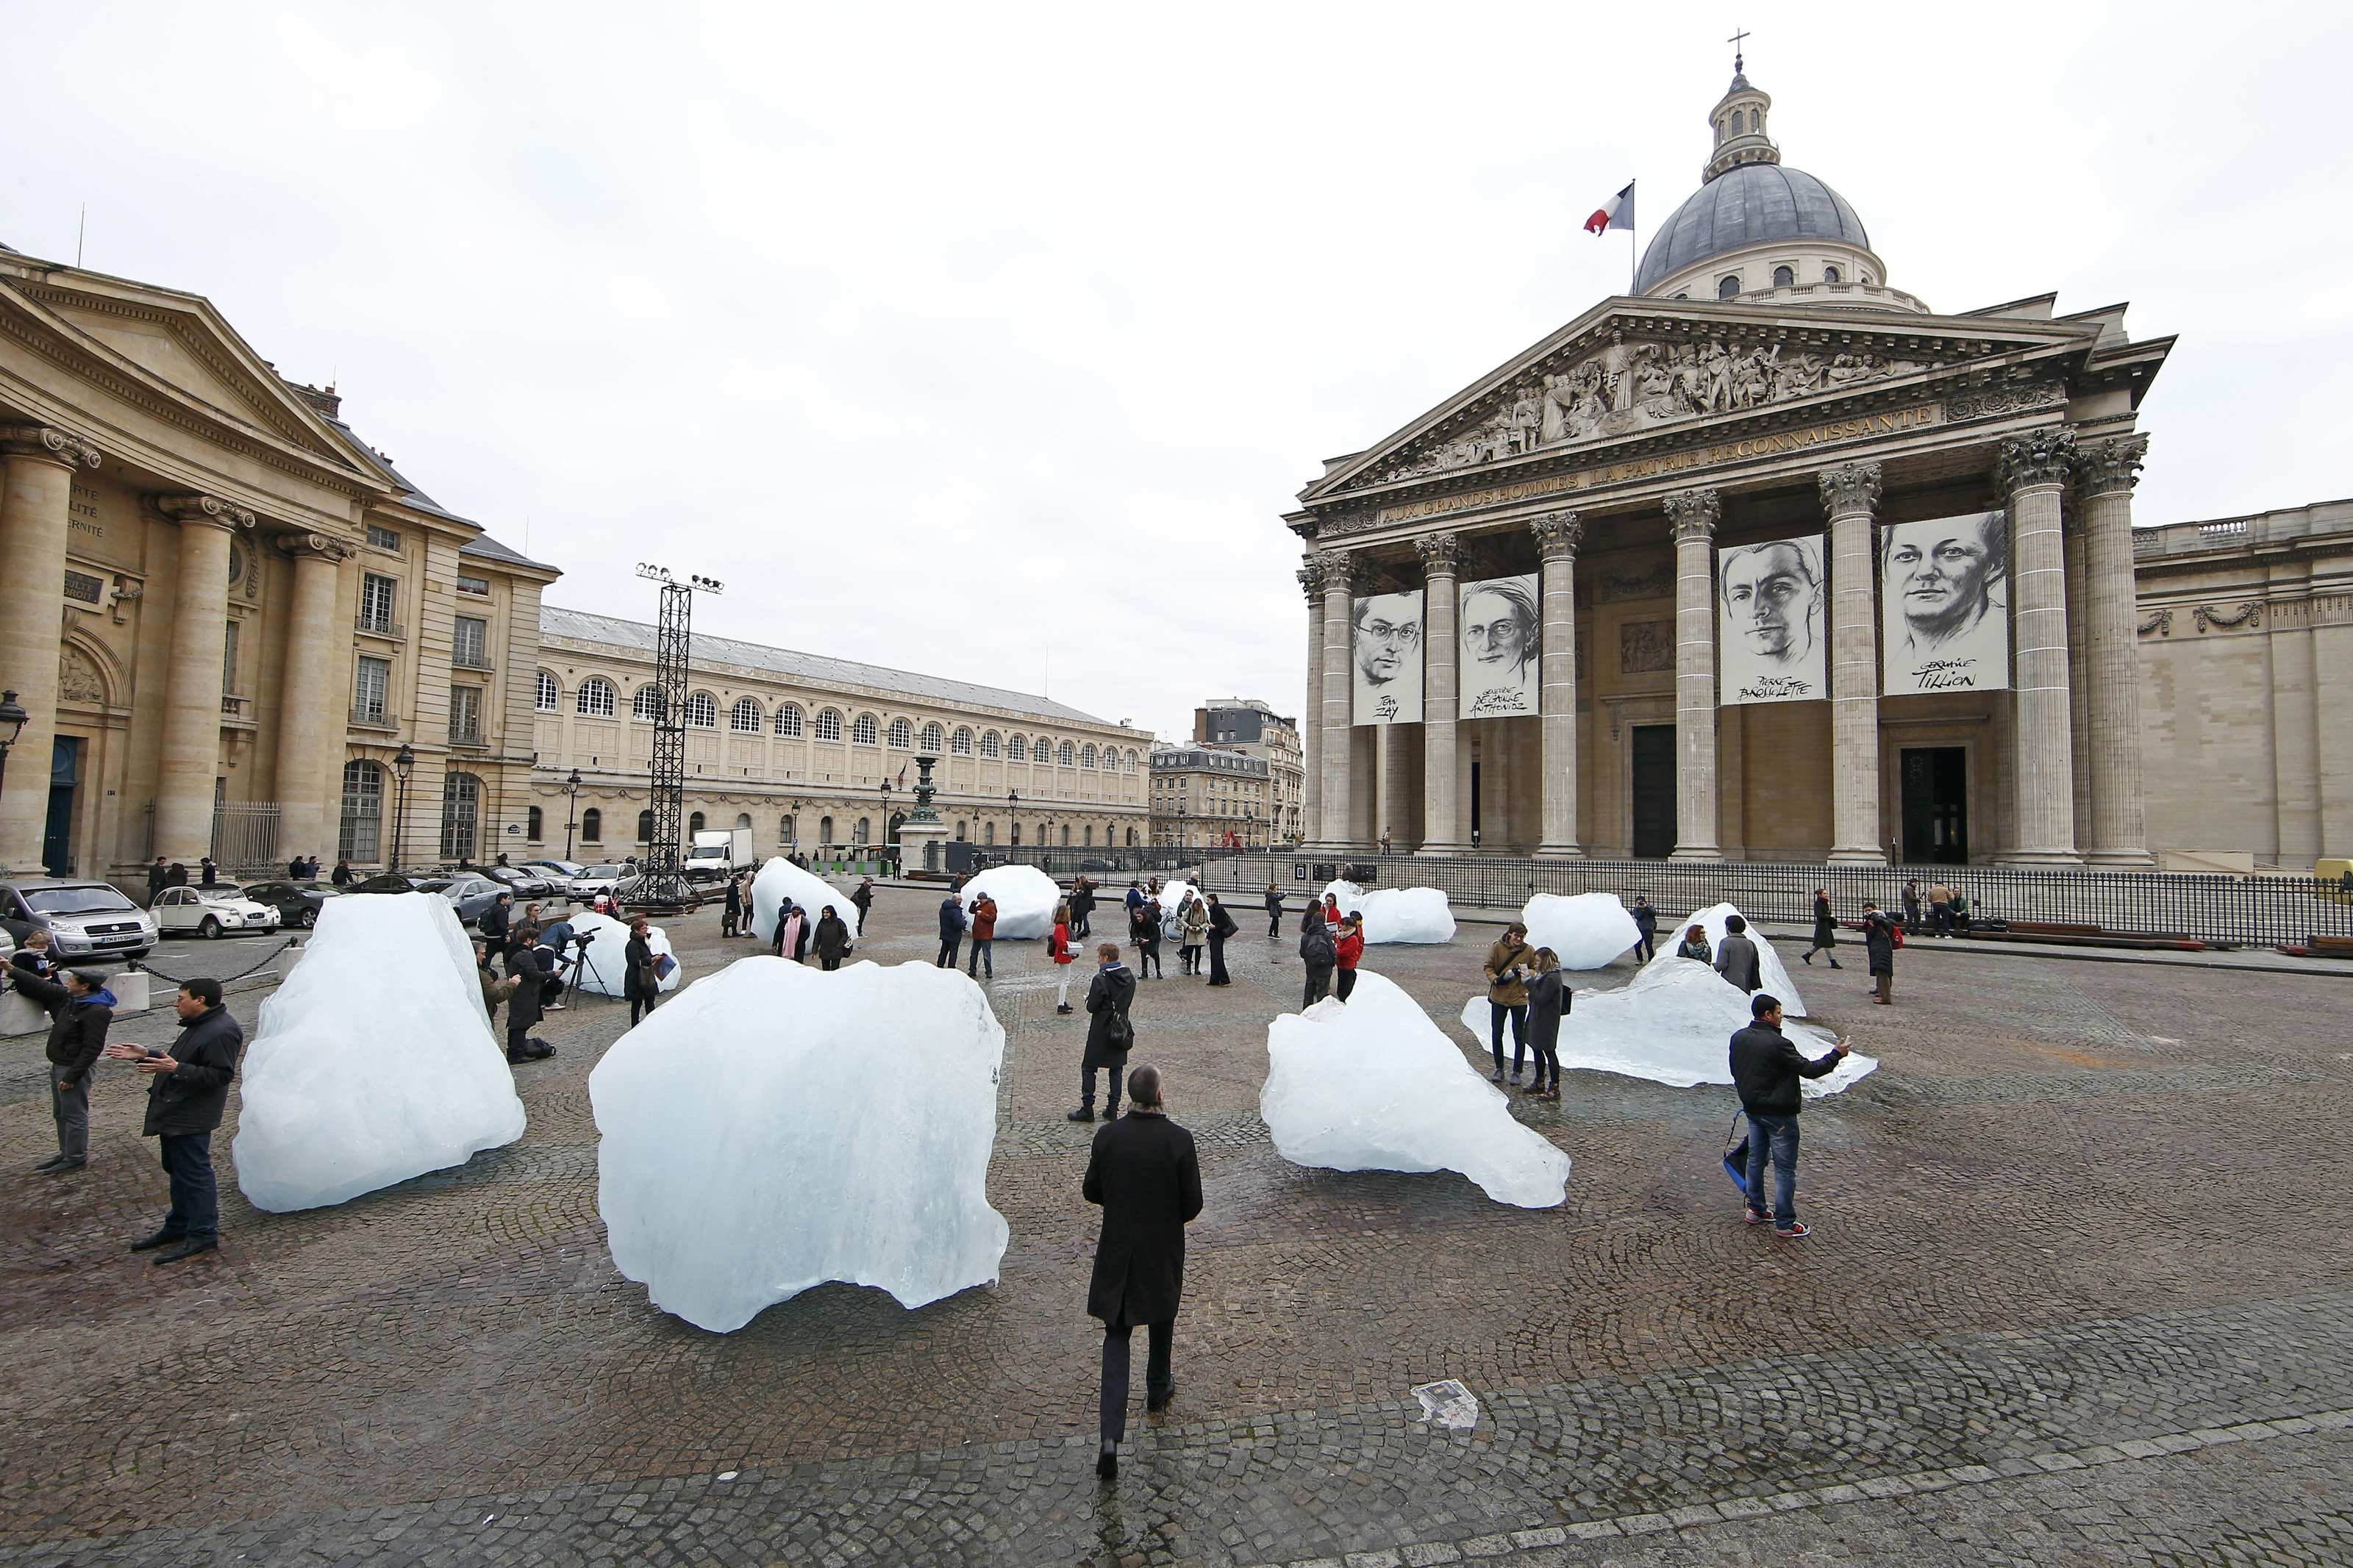 Visitors walk through ice blocks from Greenland installed on the Place du Pantheon for a project called Ice Watch Paris